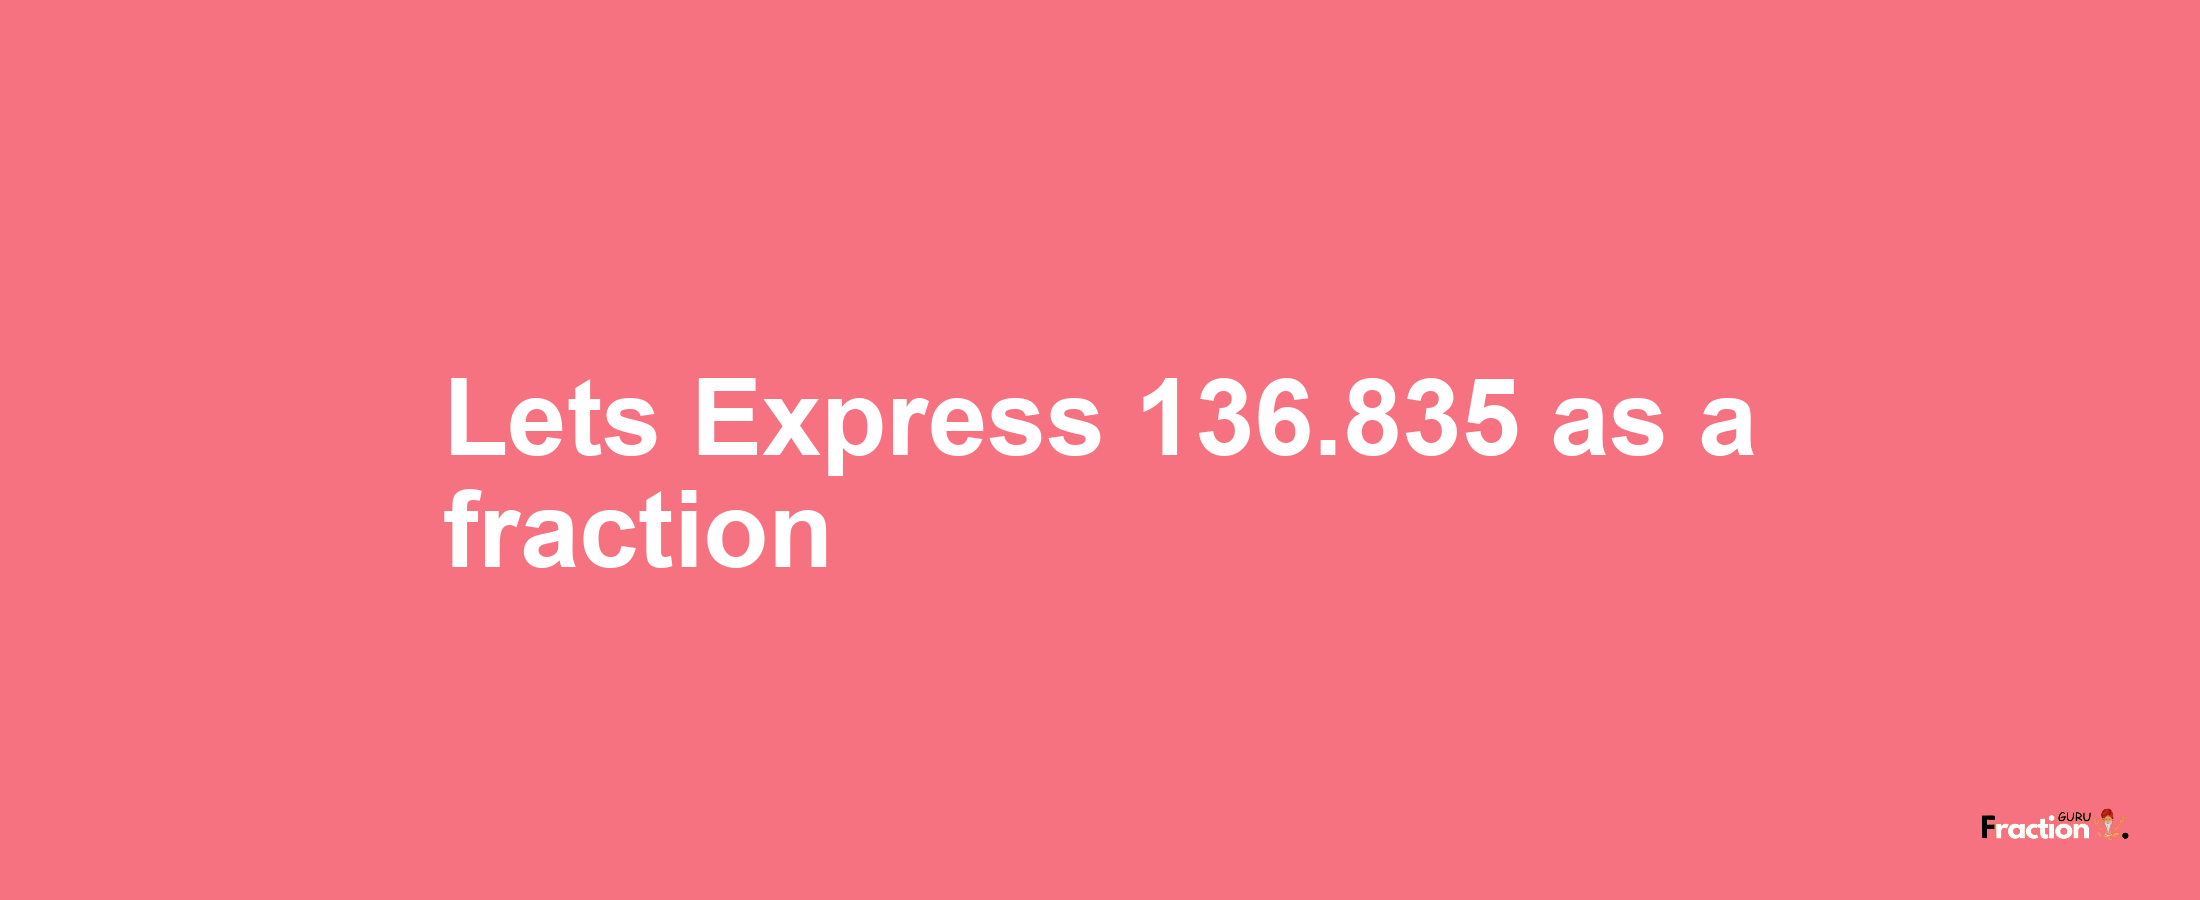 Lets Express 136.835 as afraction